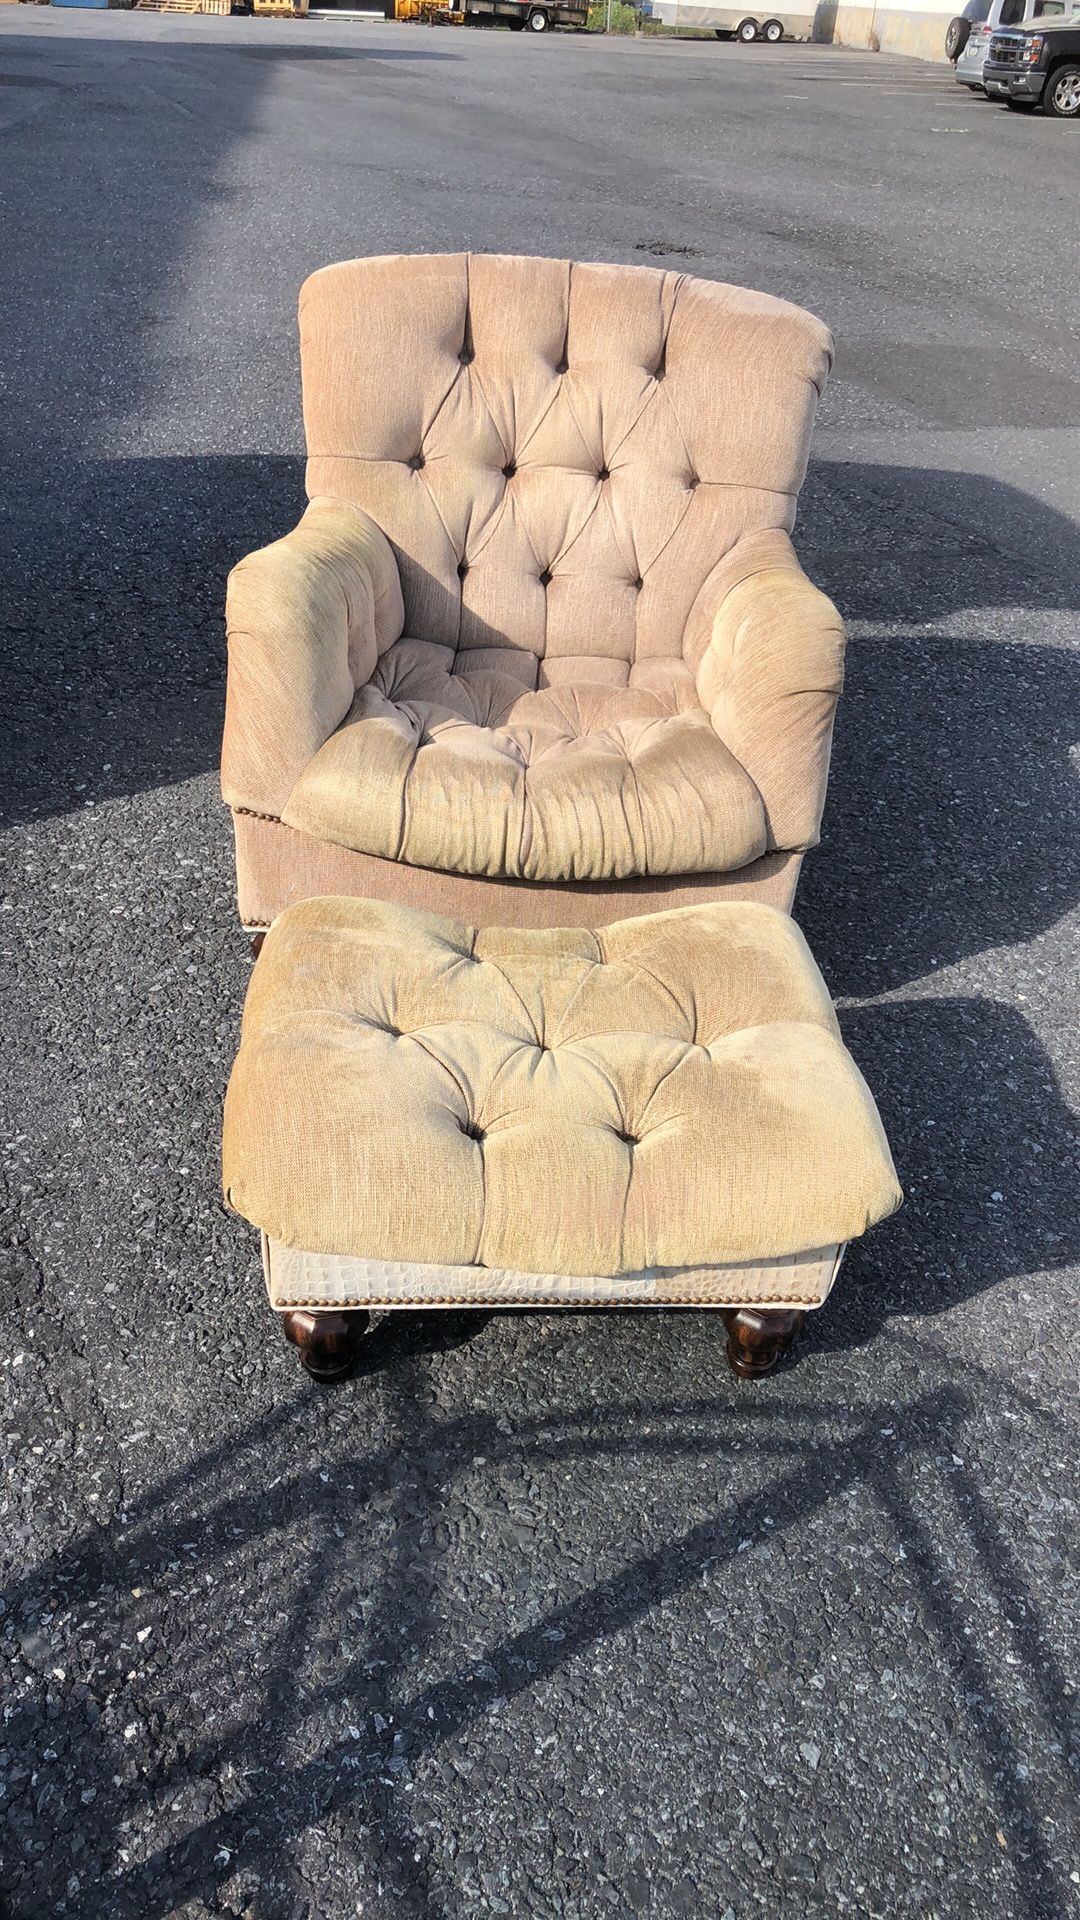 Comfortable living room chair with ottoman good condition